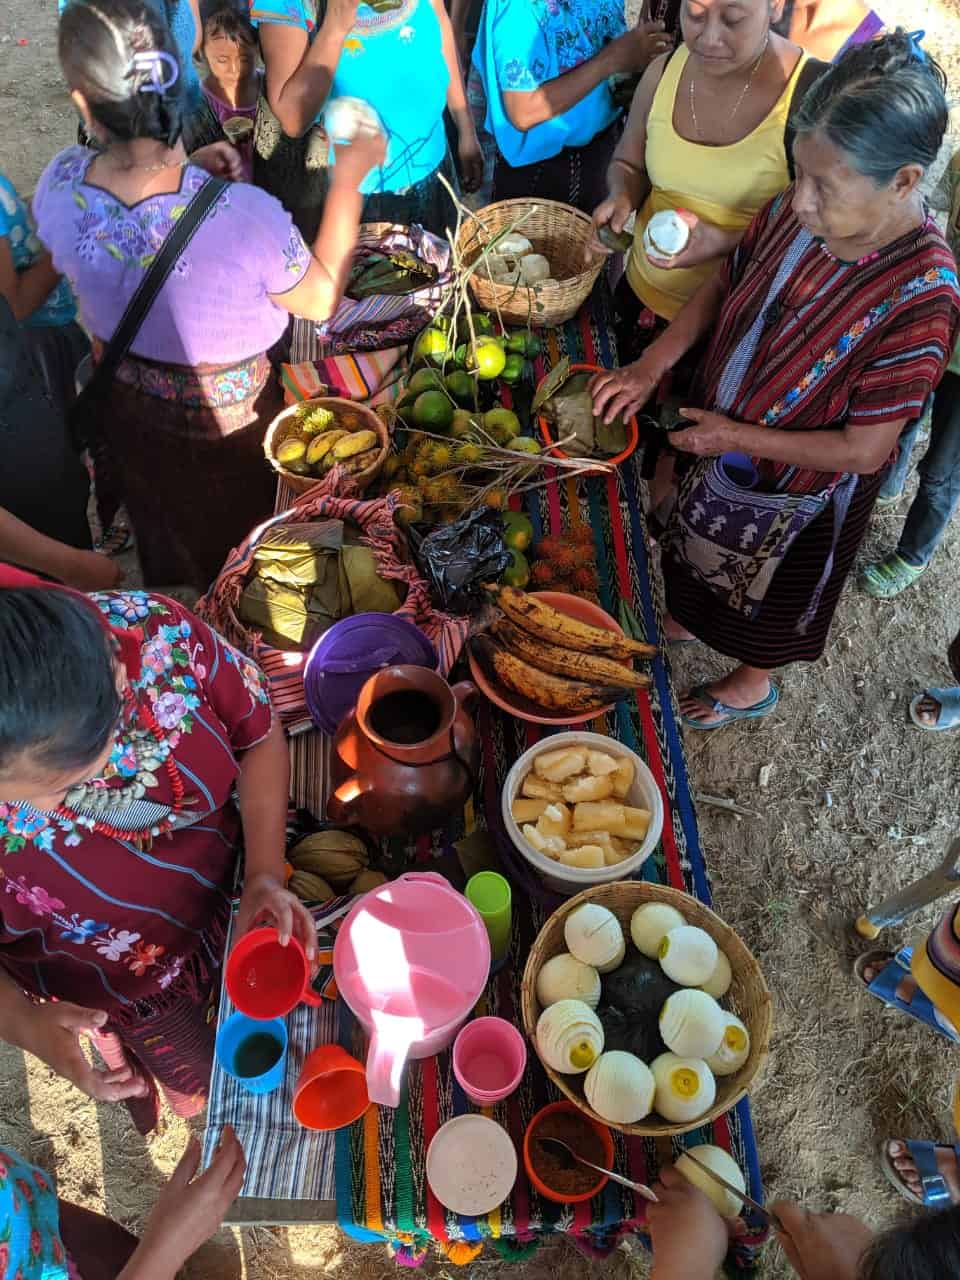 Women gather around a brightly colored table laden with fruits and drinks.